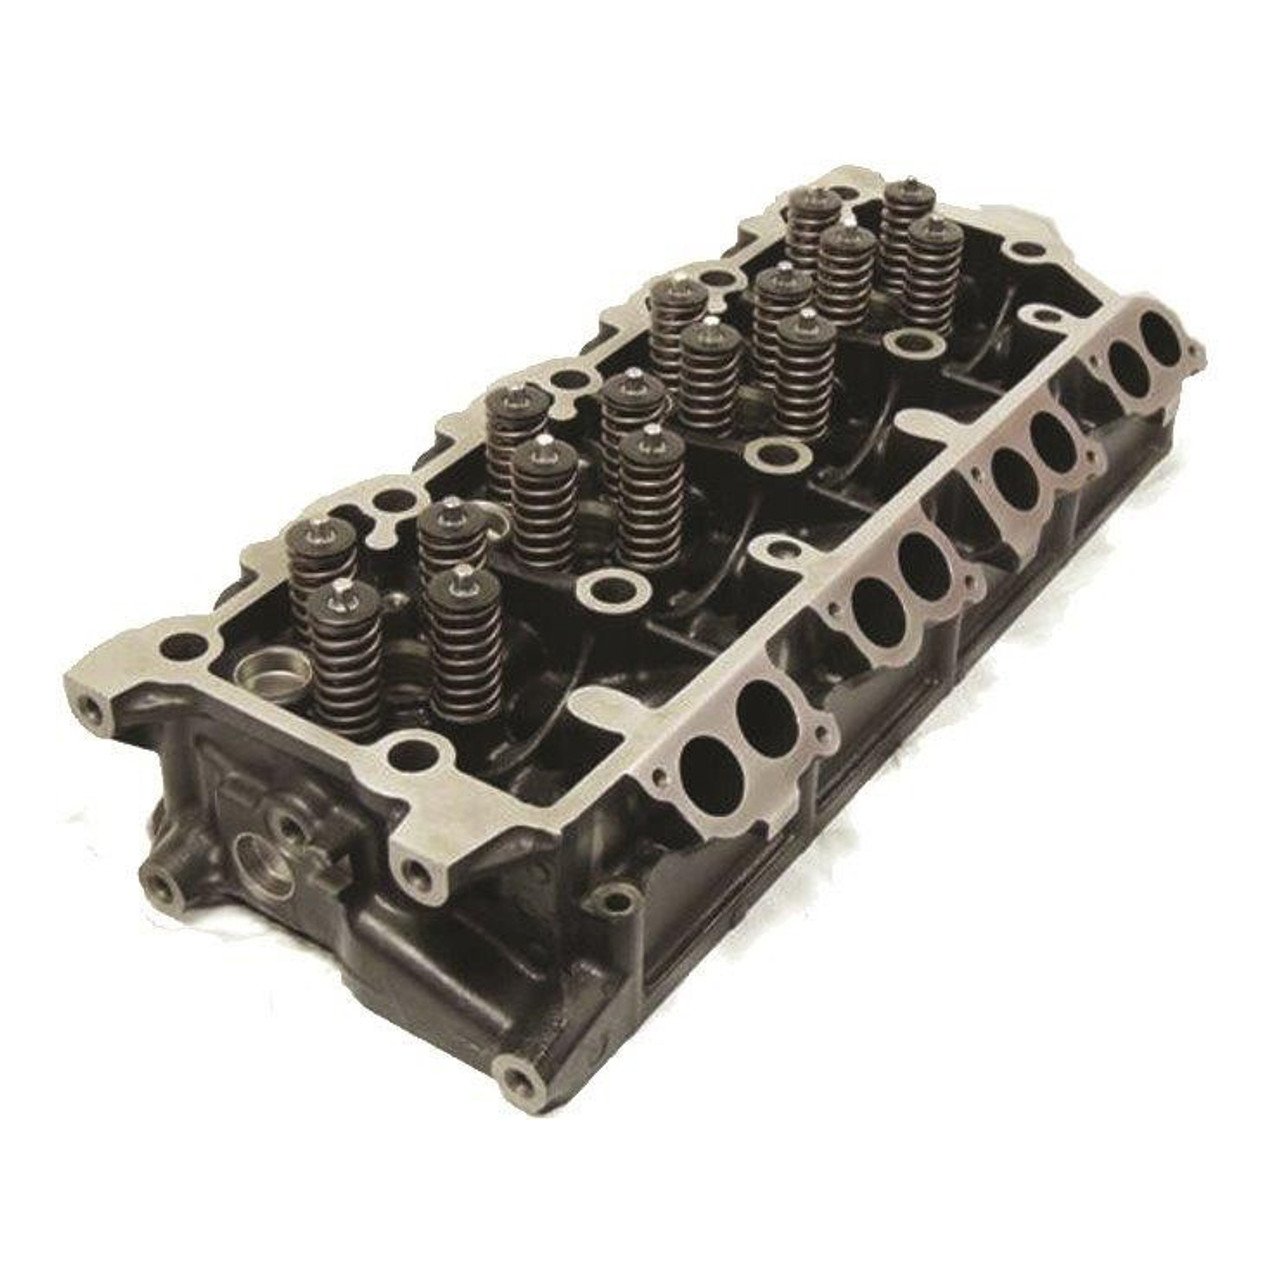 PROMAXX FOR 85XN REPLACEMENT CYLINDER HEAD 2003-2007 FORD 6.0L POWERSTROKE